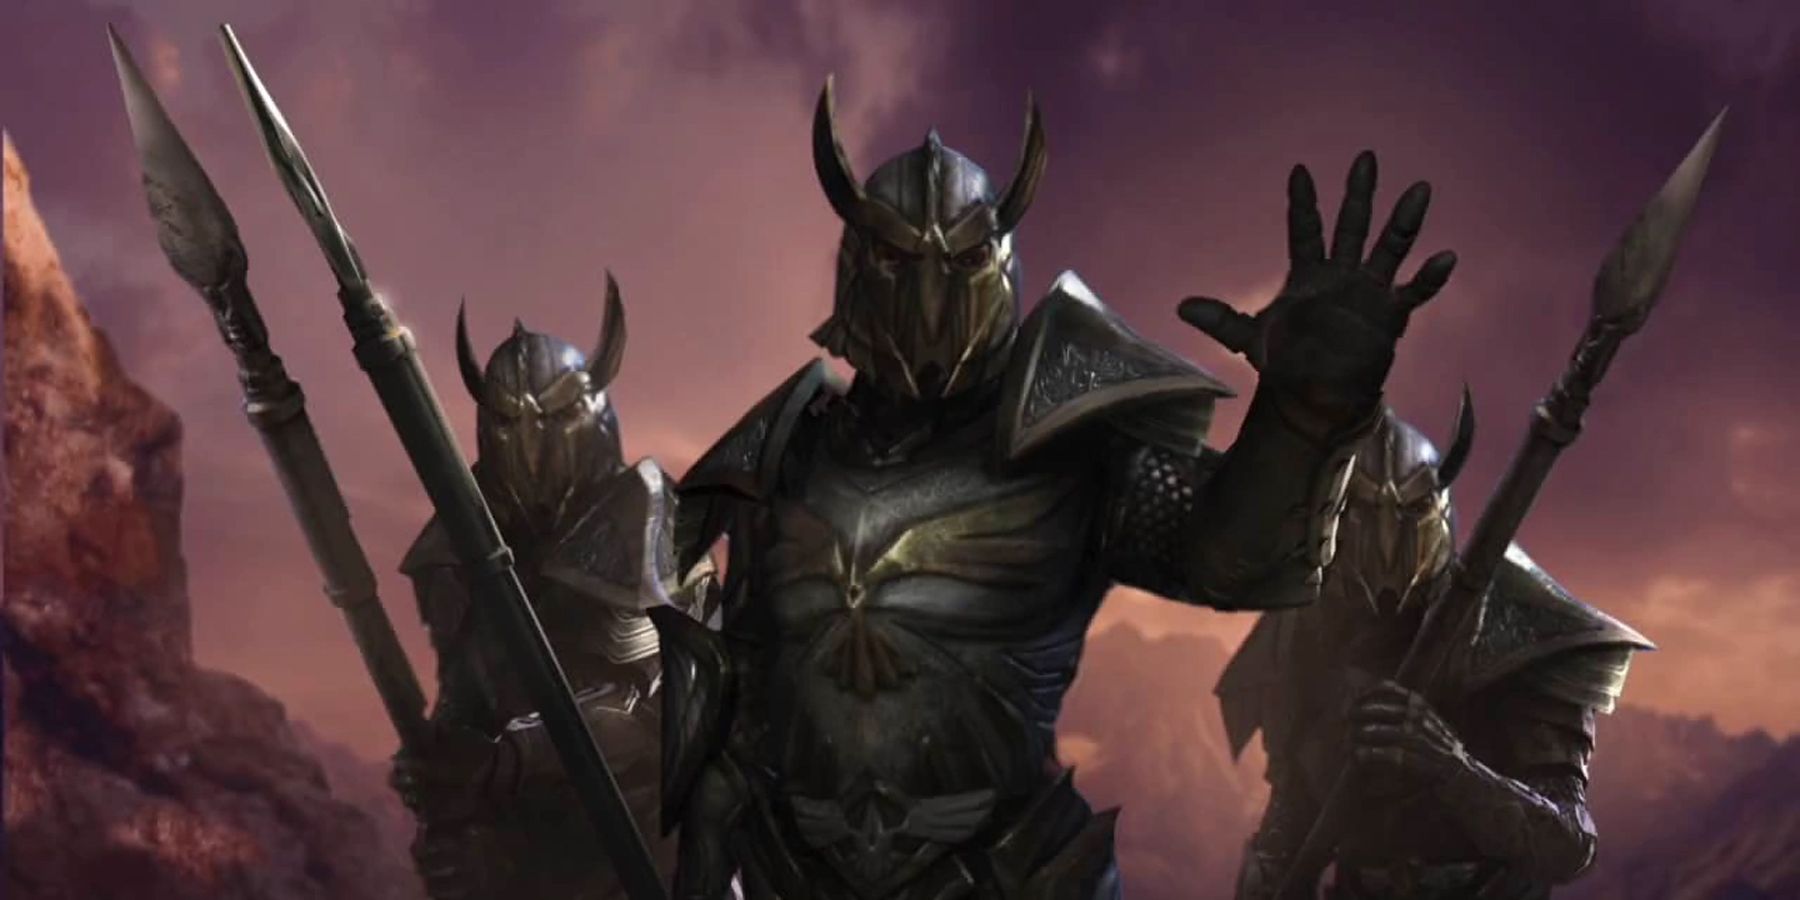 Elder Scrolls 6 Should be About the Thalmor